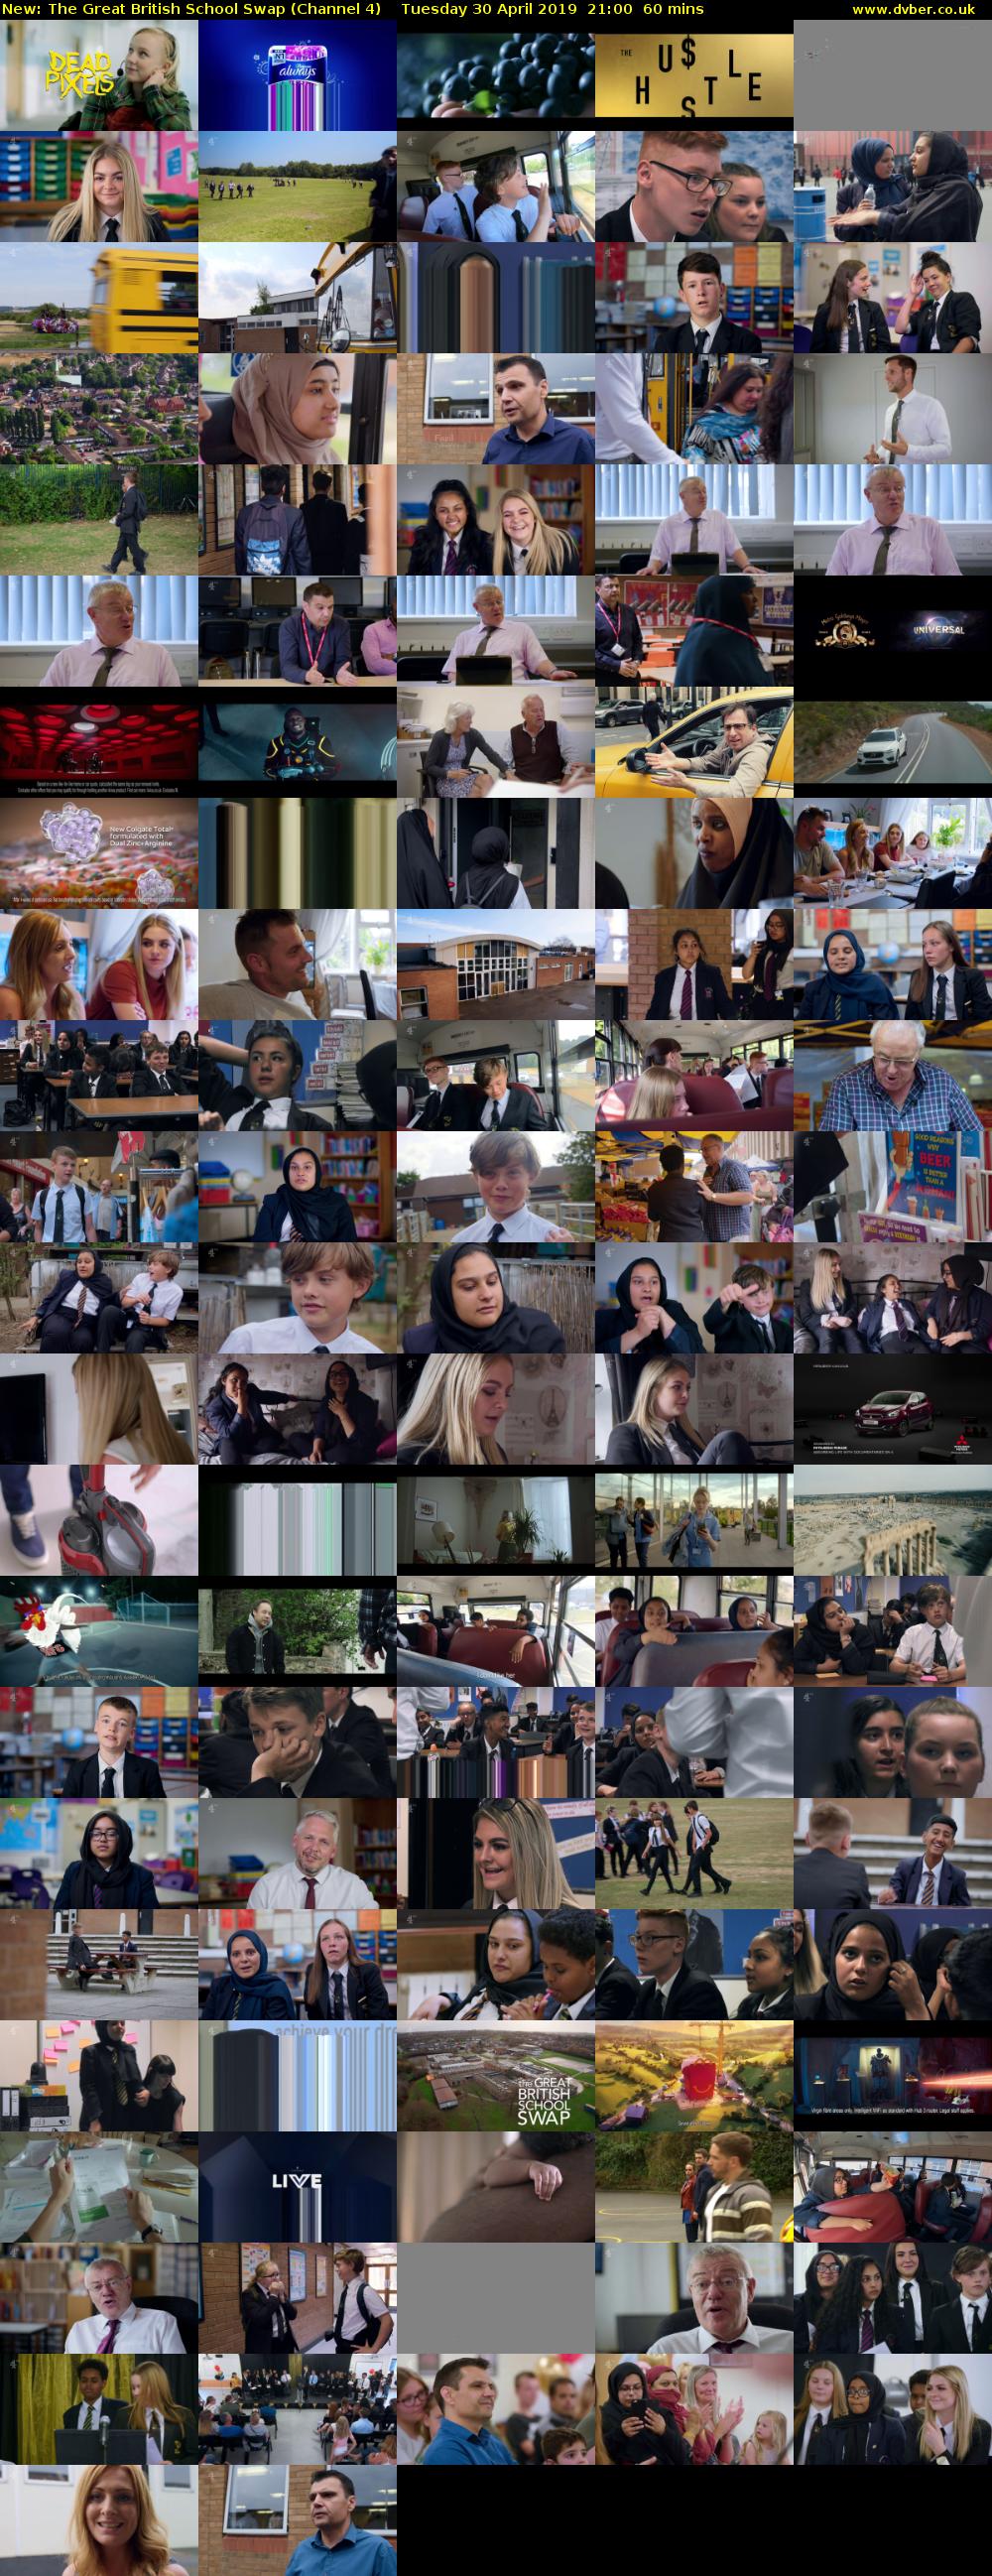 The Great British School Swap (Channel 4) Tuesday 30 April 2019 21:00 - 22:00